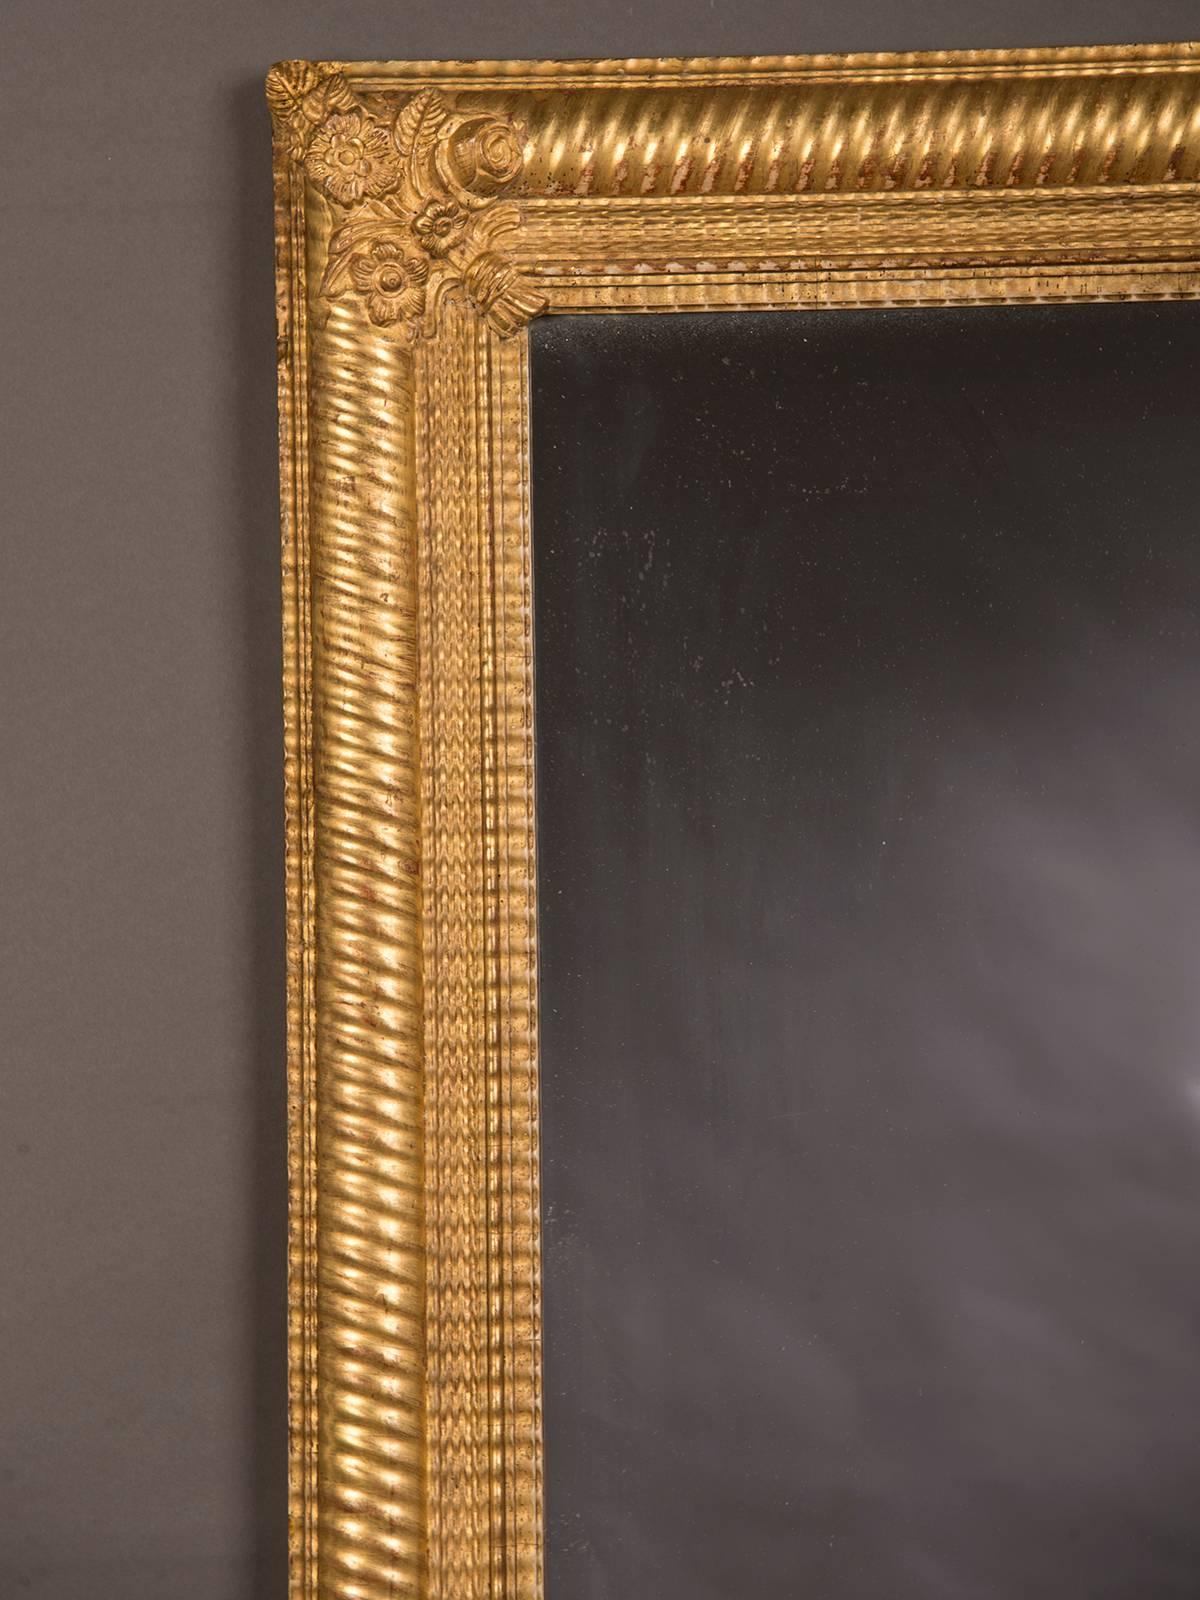 Receive our new selections direct from 1stdibs by email each week. Please click follow dealer below and see them first!

Antique French Belle Époque period gold leaf framed mirror, circa 1895. Measures: 34 1/2